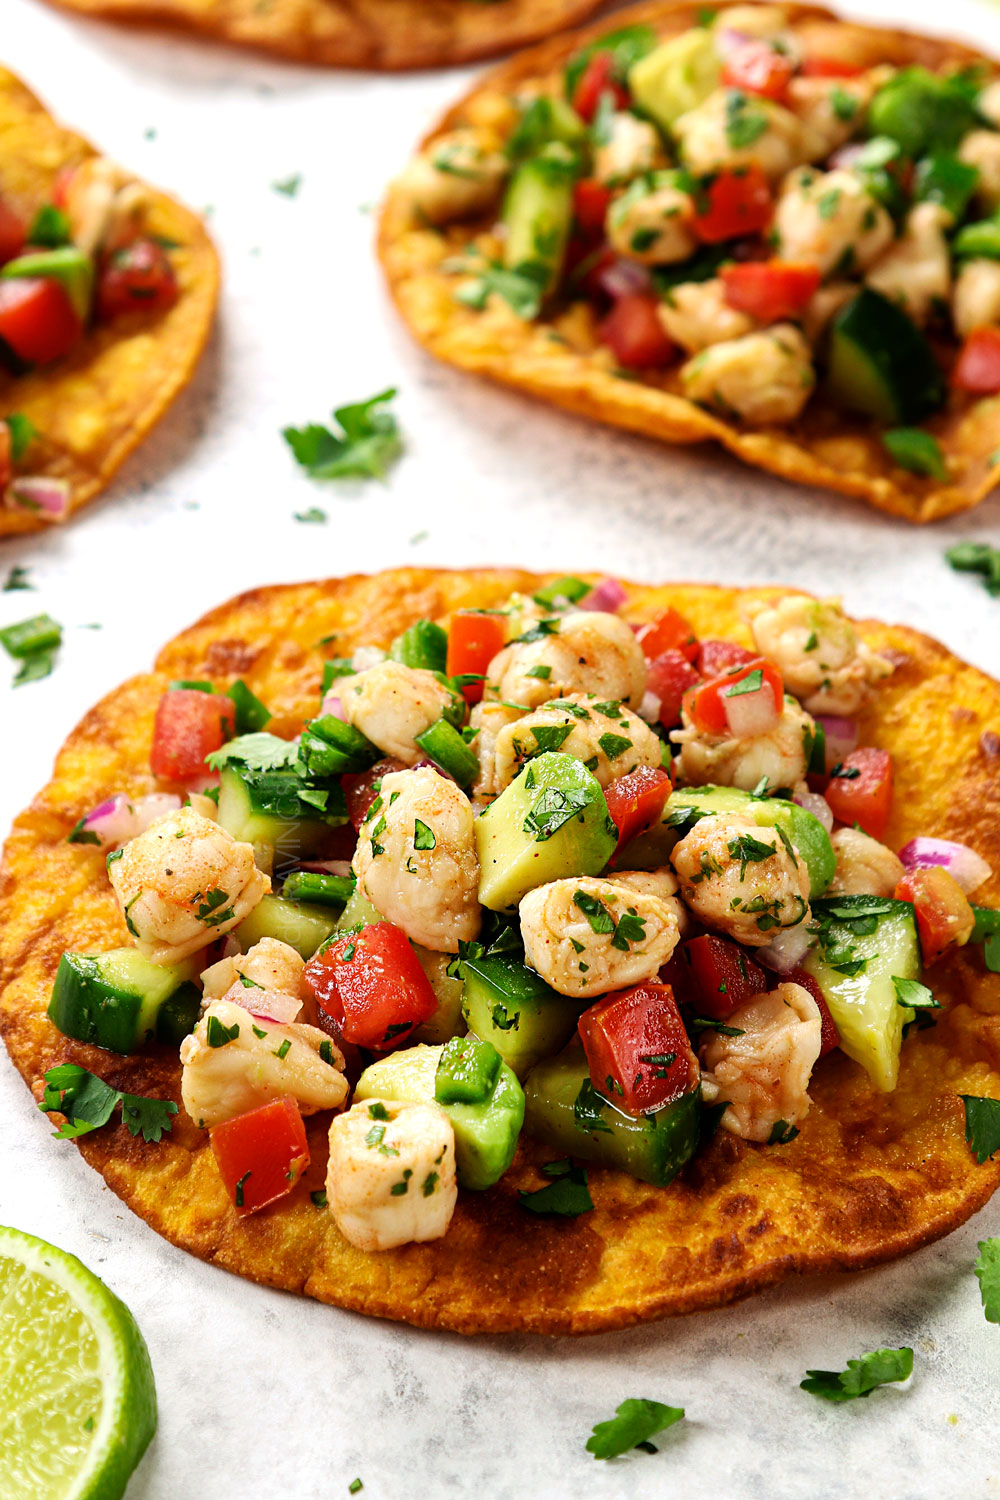 up close of serving shrimp ceviche (ceviche de camaron) by topping a tostada with ceviche